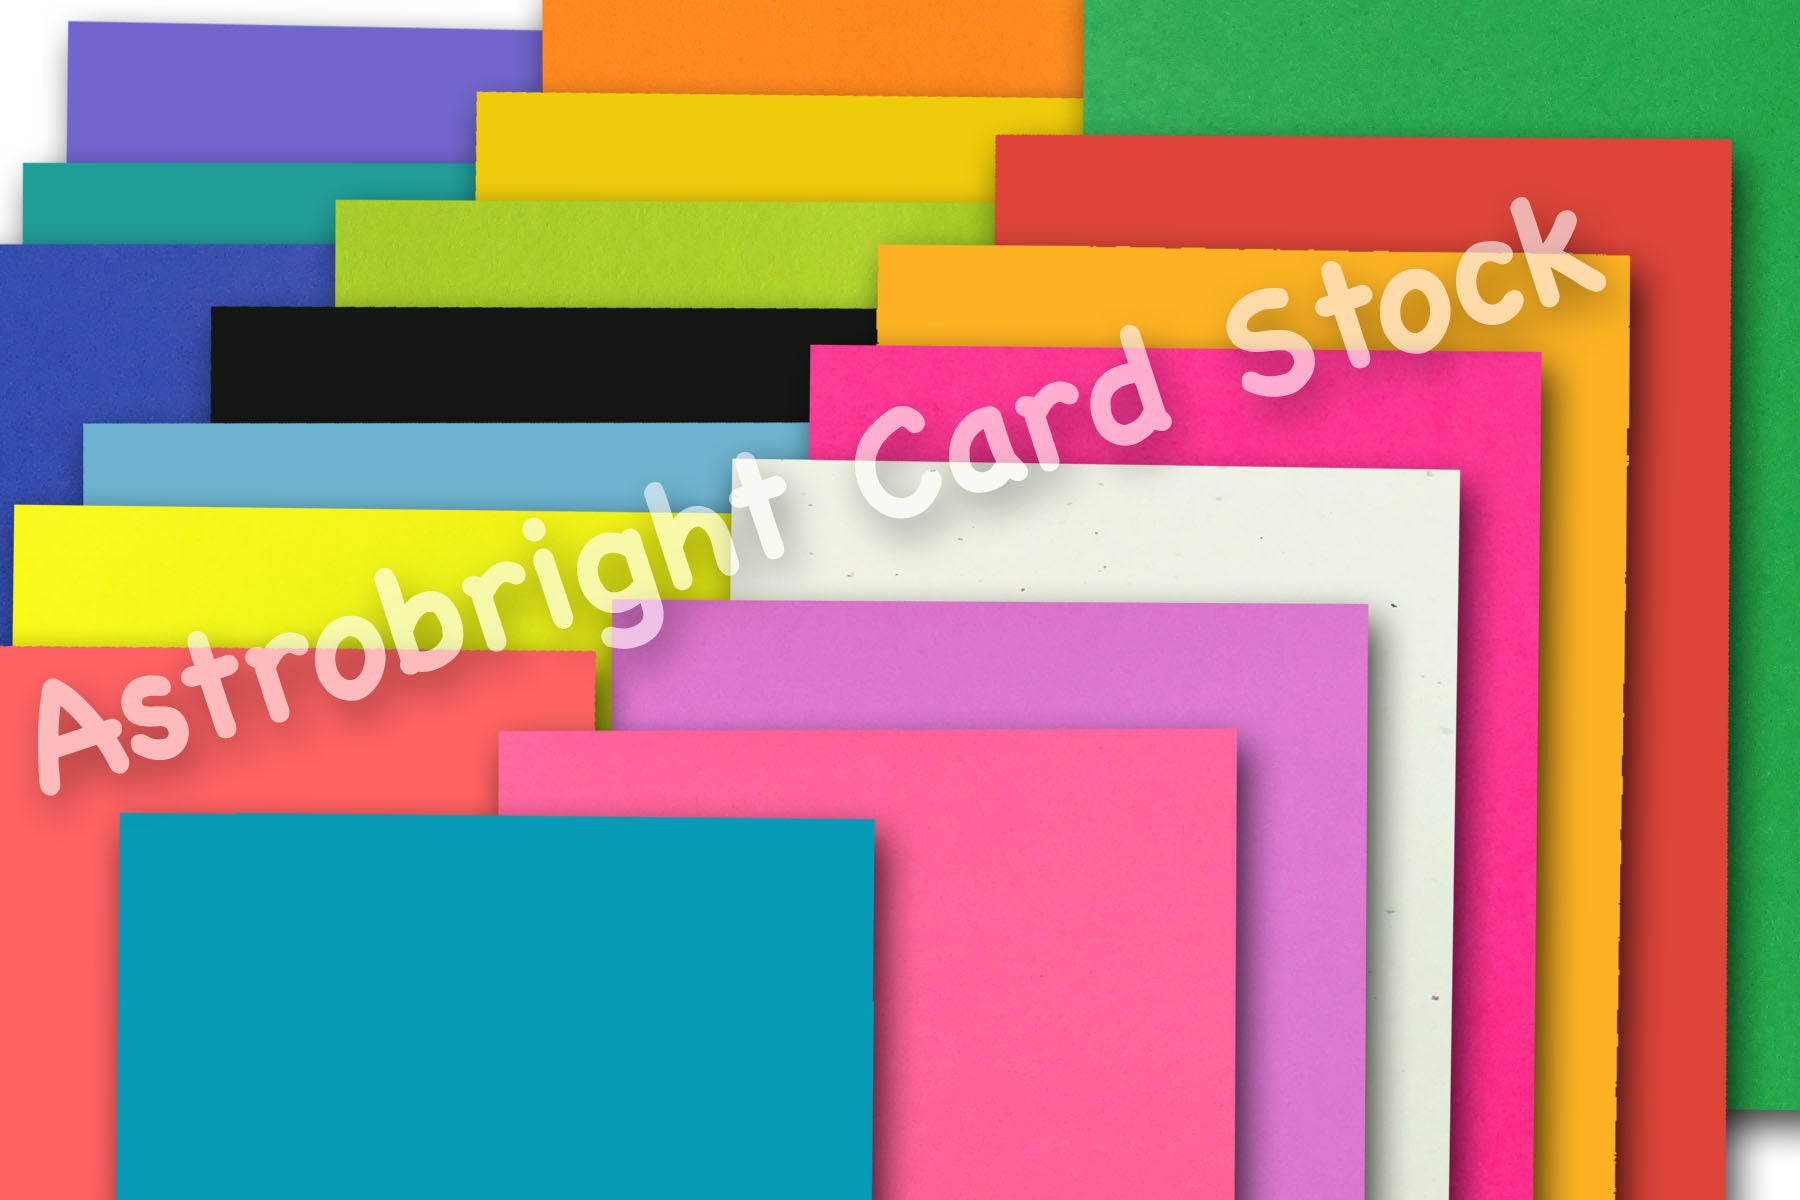 Astrobrights Celestial Blue Card Stock - 11 x 17 in 65 lb Cover Smooth 30%  Recycled 250 per Package